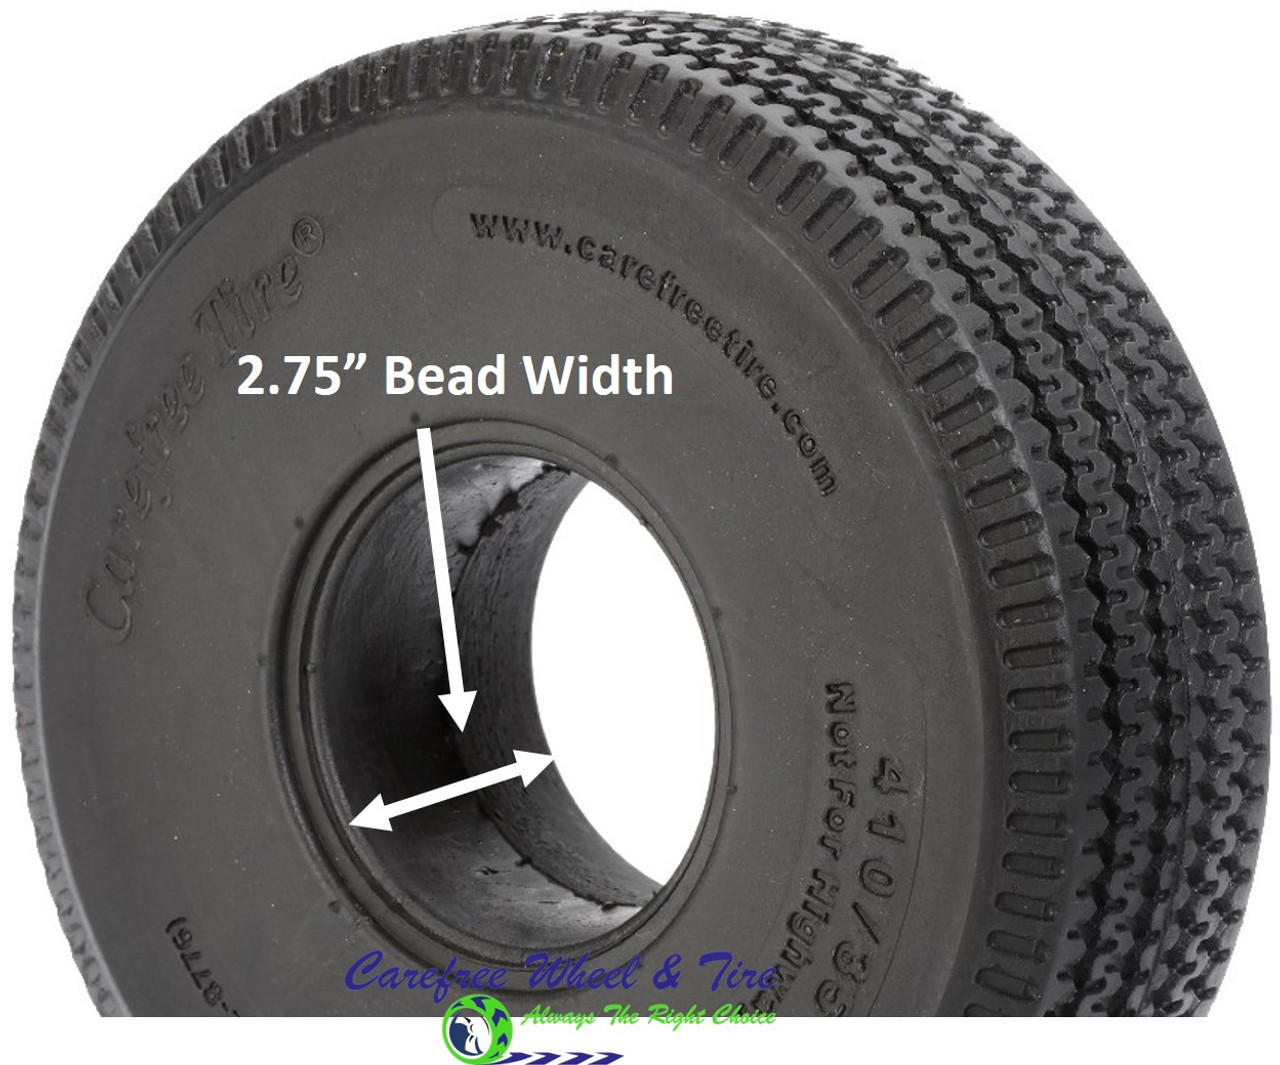 APPROVED VENDOR Replacement Tire: 4.10/3.50-4, 10 in Tire Dia., 3 1/2 in  Tire Wd, Sawtooth, Rubber